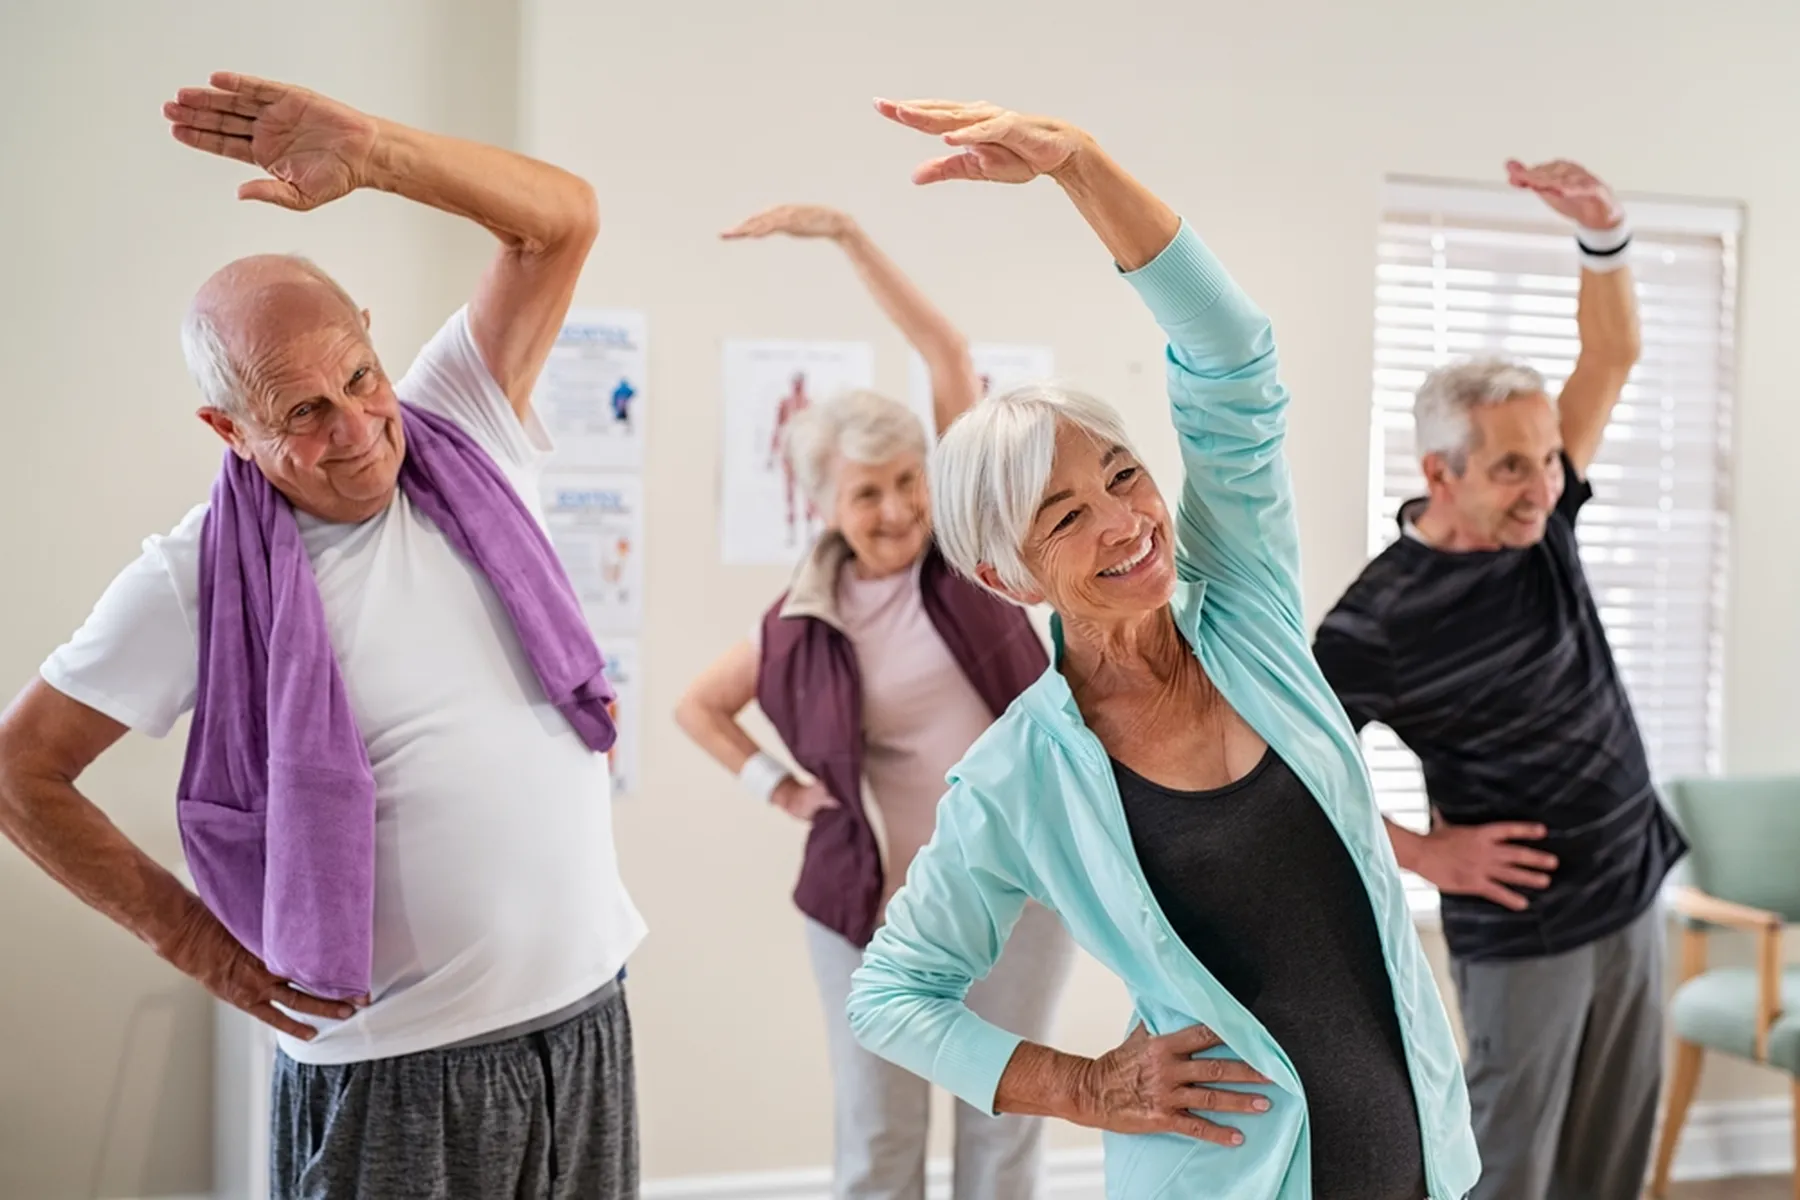 Four older people stretching with one hand on their hips and the other raised over their bodies.